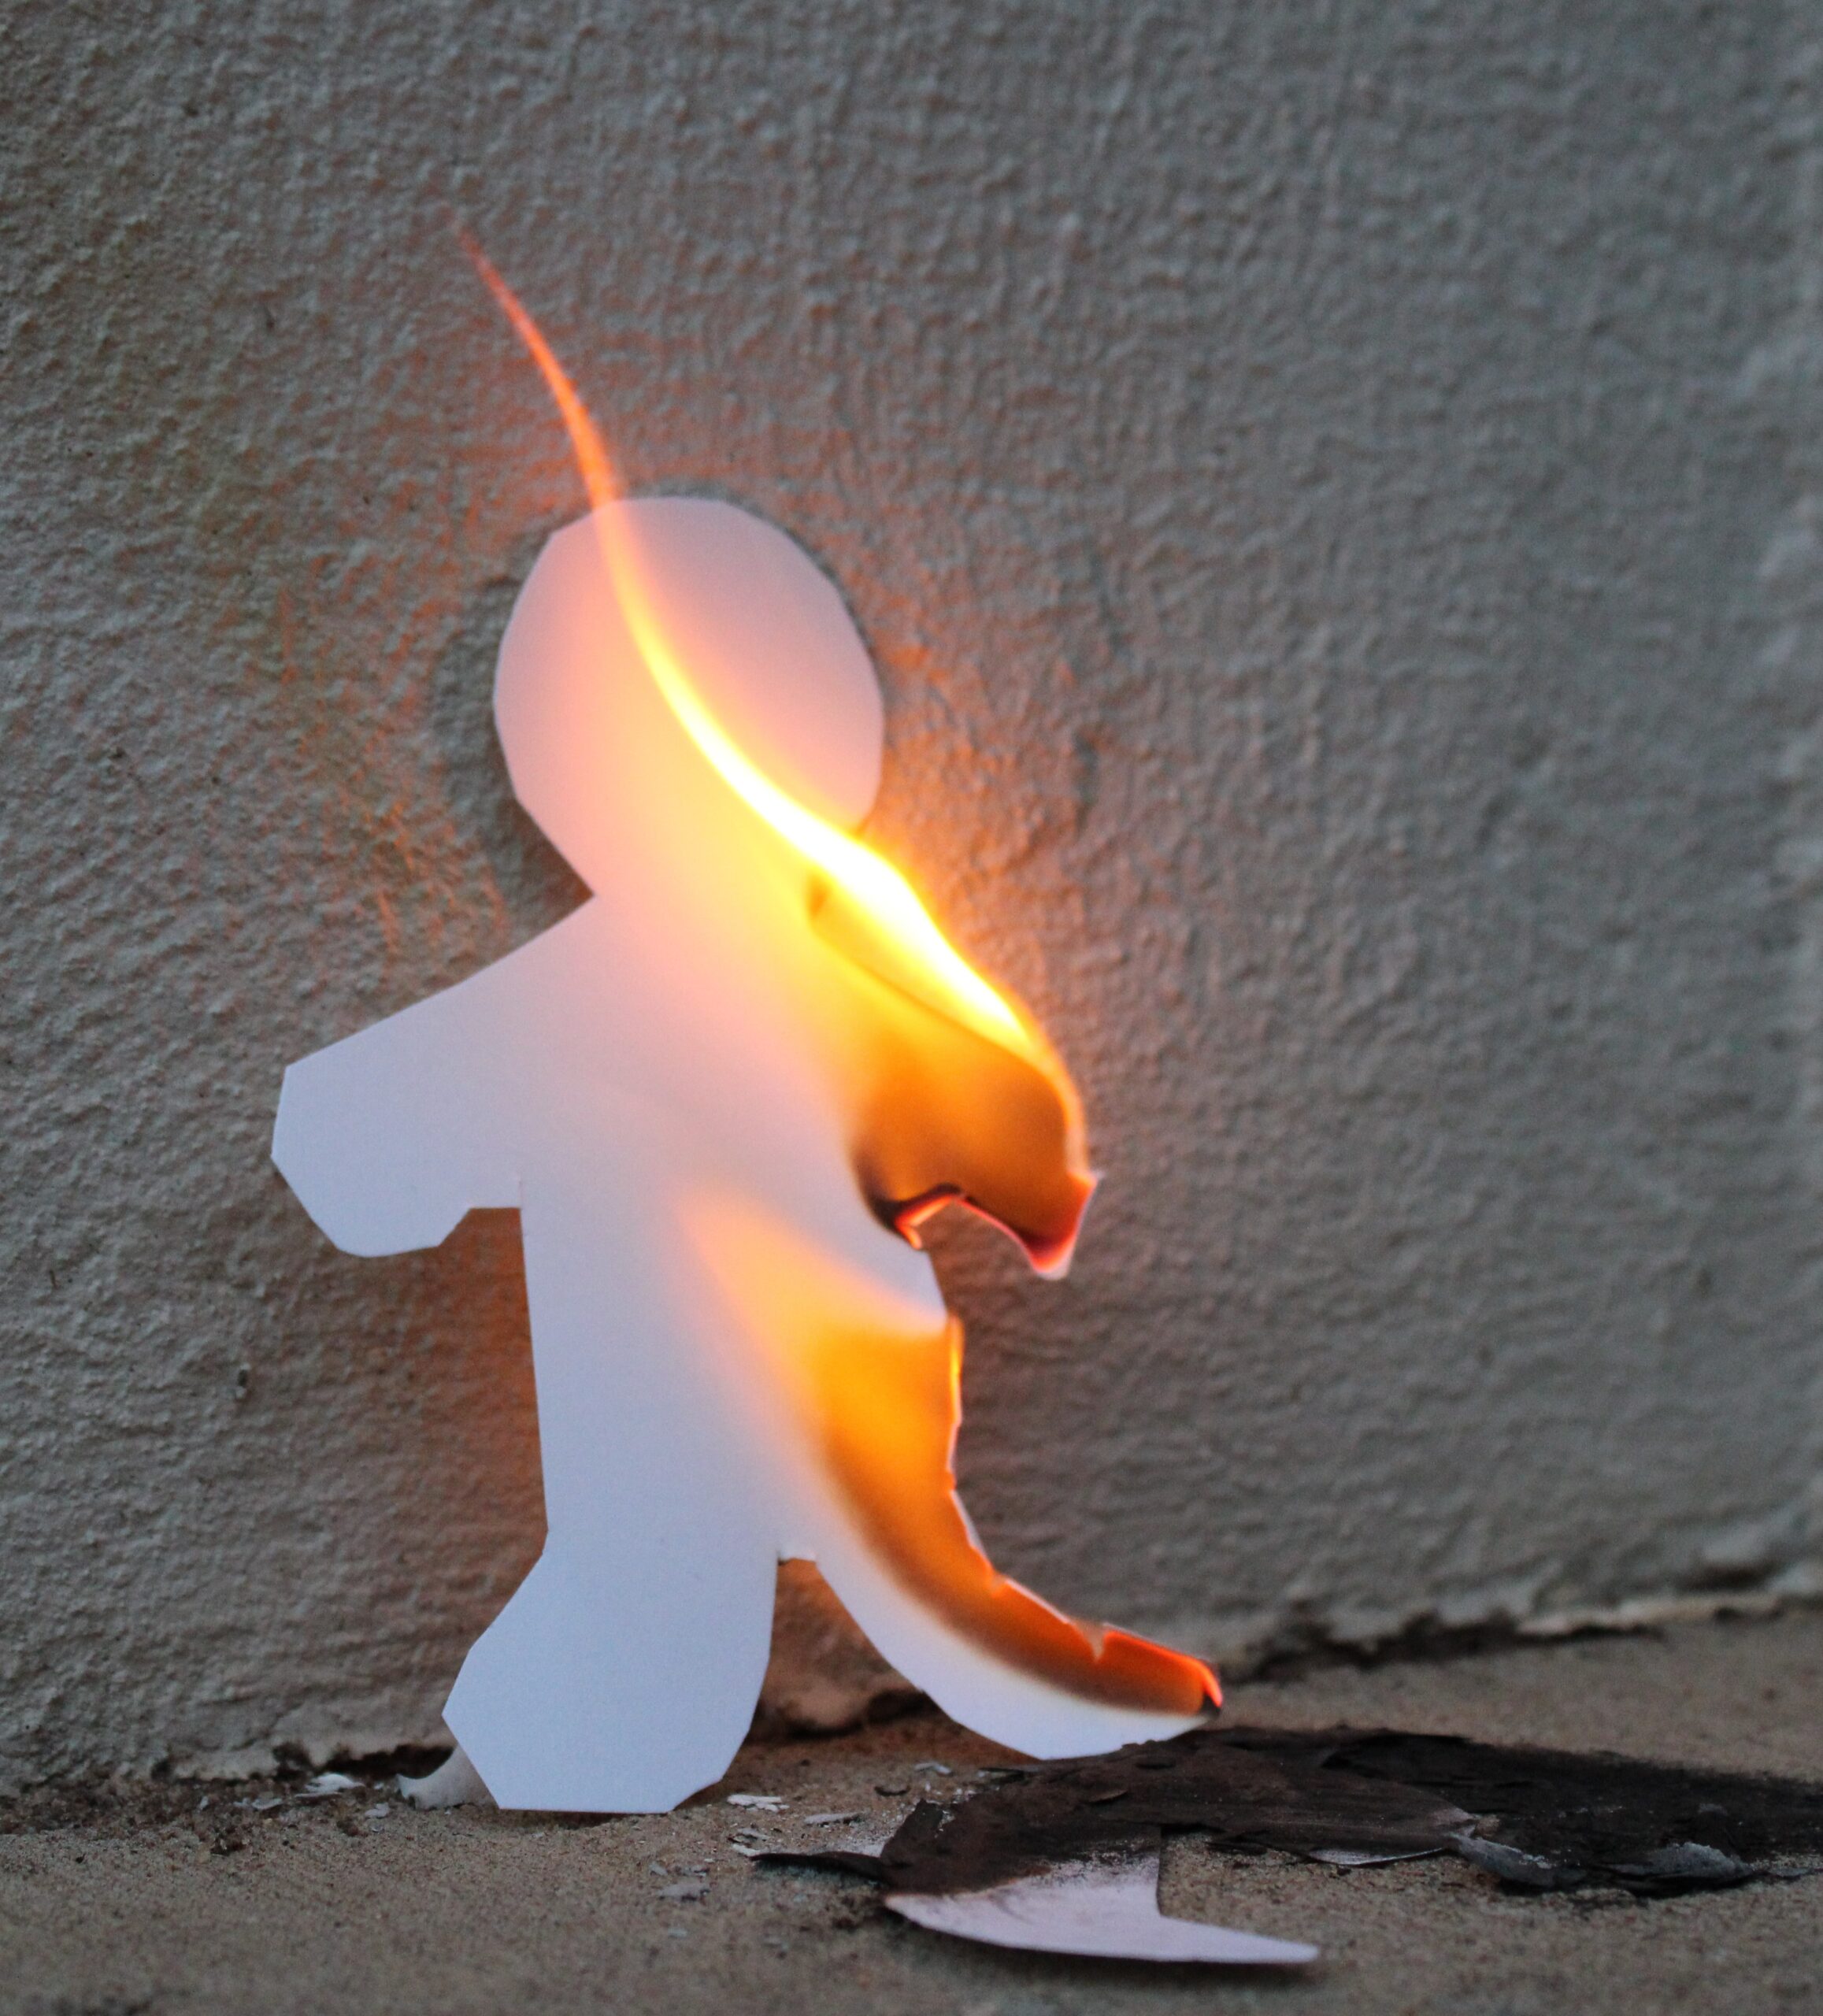 Paper Person on Fire